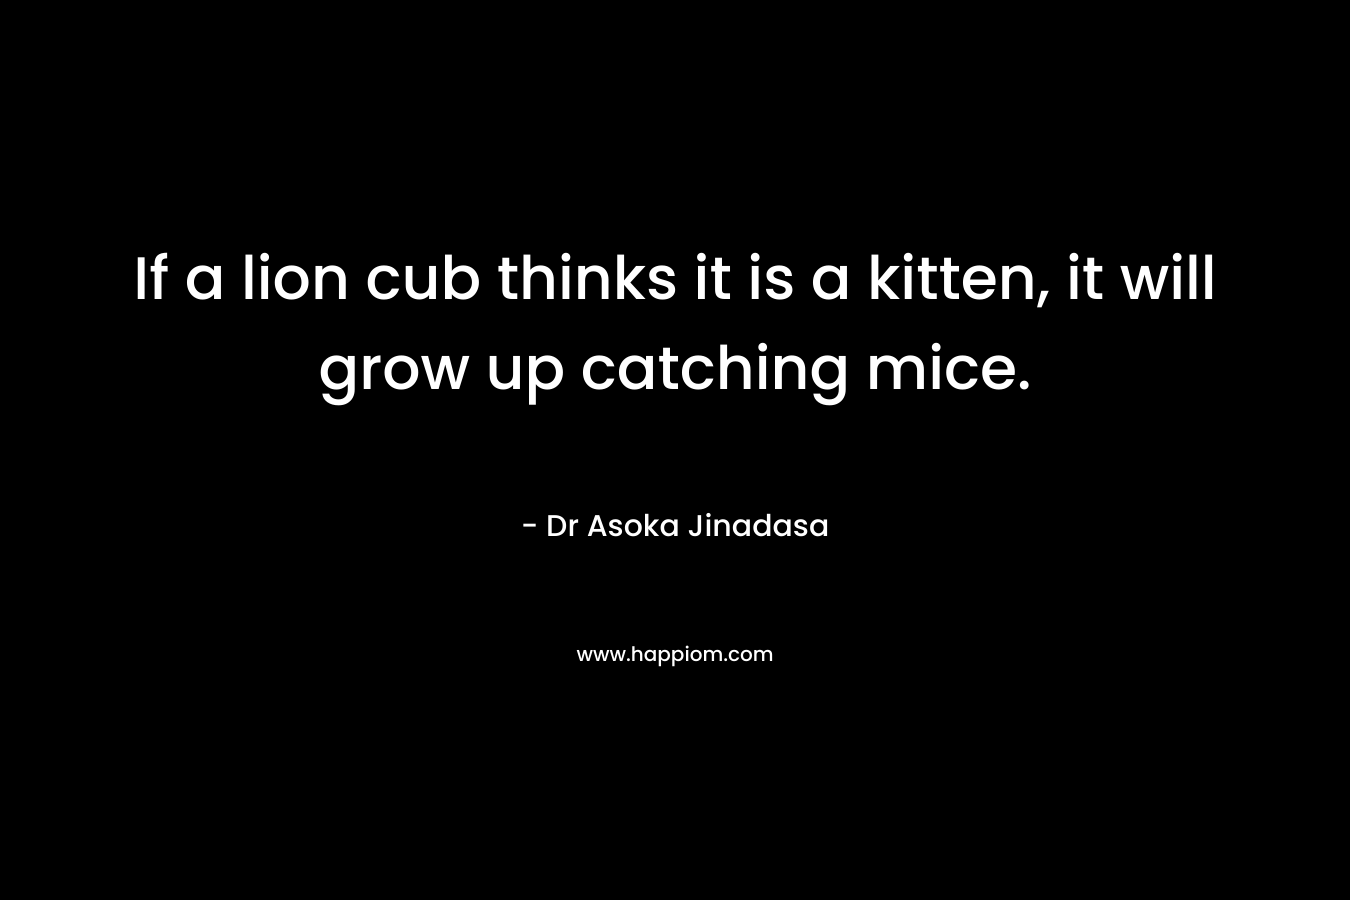 If a lion cub thinks it is a kitten, it will grow up catching mice. – Dr Asoka Jinadasa